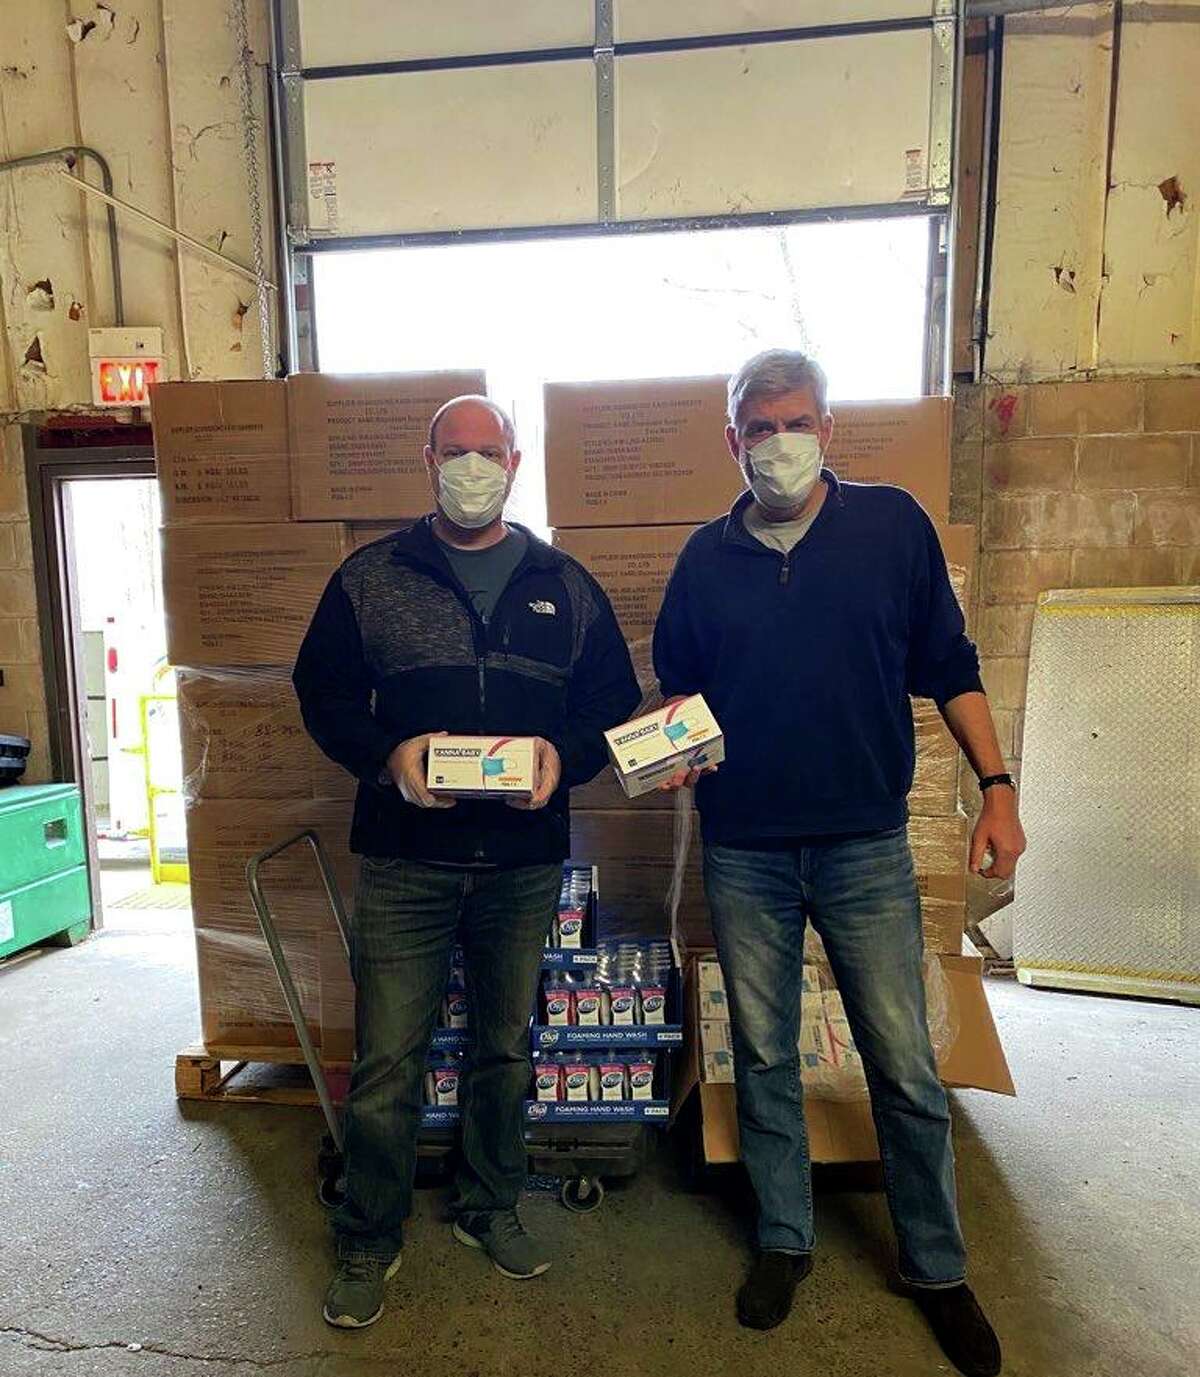 The first deliveries of masks for Masks for Heroes was made possible by (l-r) Stamford Firefighter Patrick Sasser and Masks for Heroes Founder Bob Stefanowski.